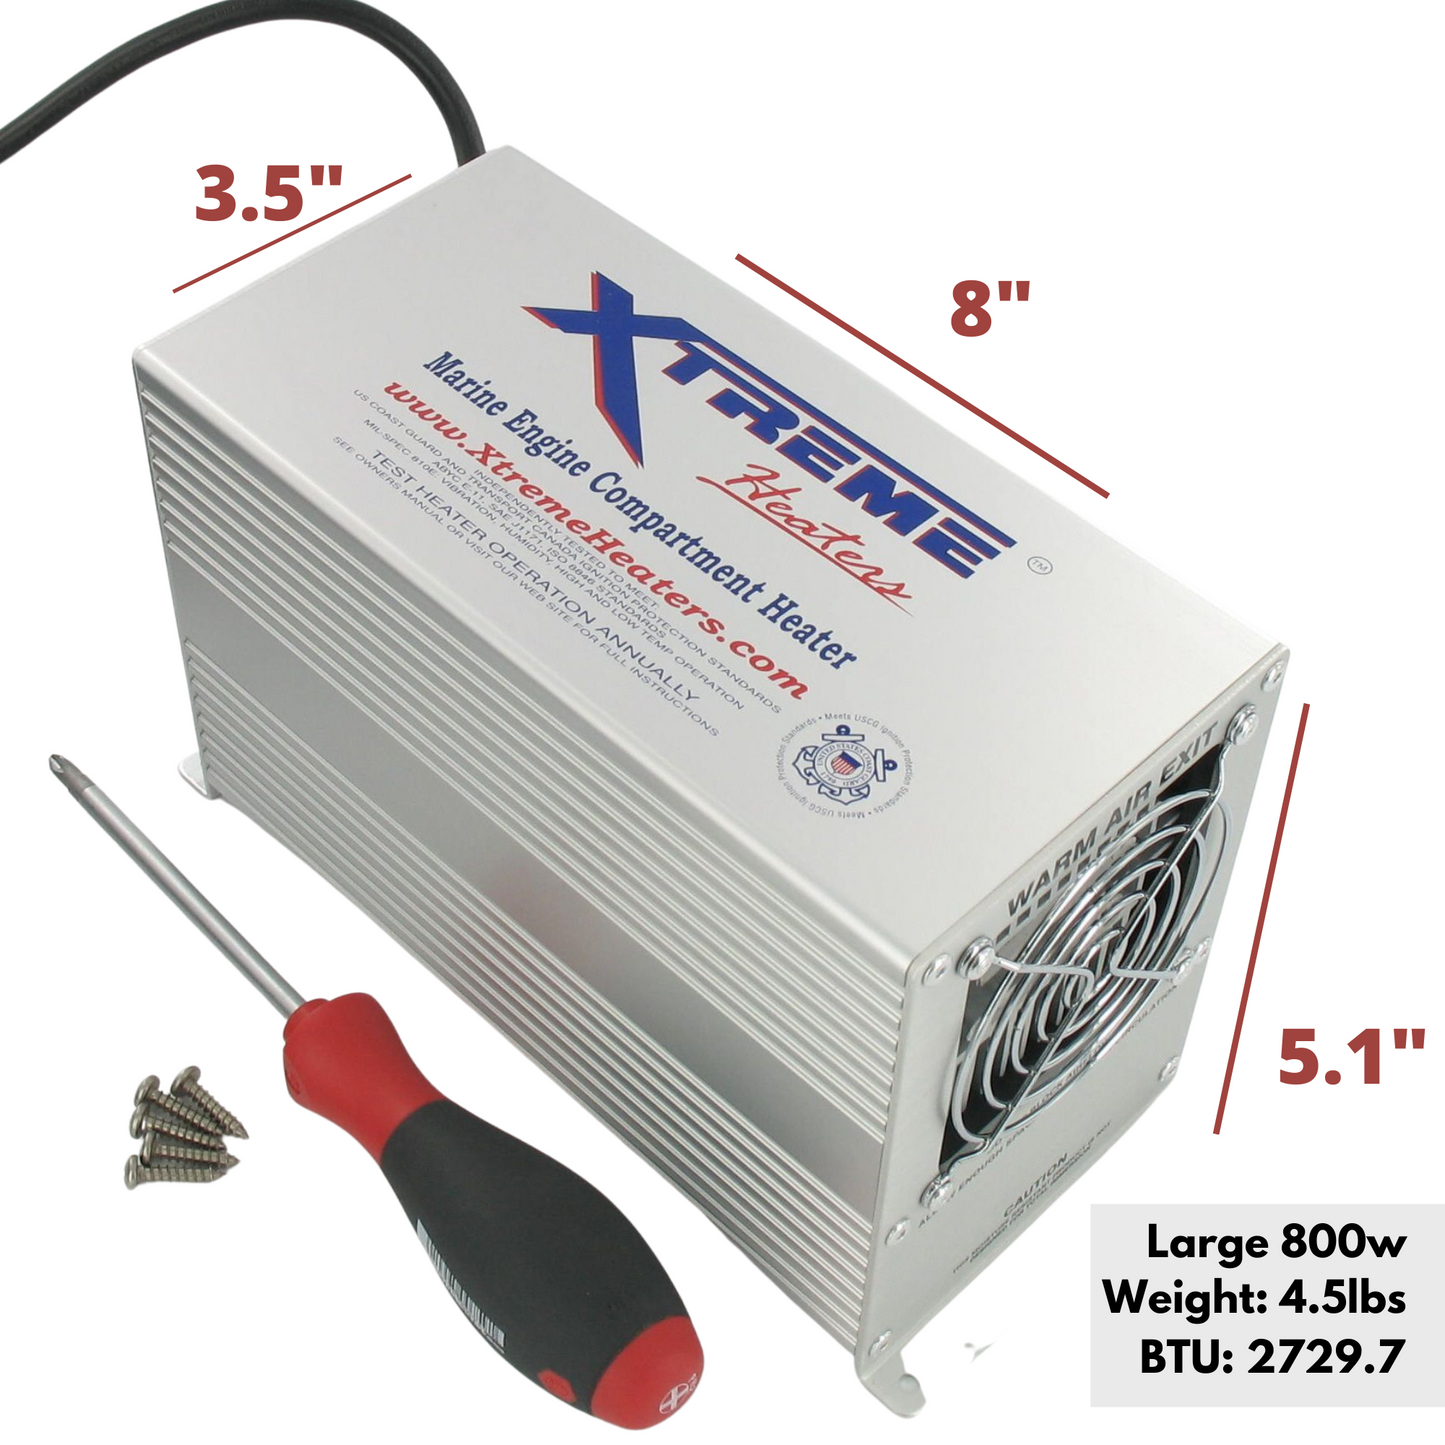 Xtreme Heater 800w Dimensions